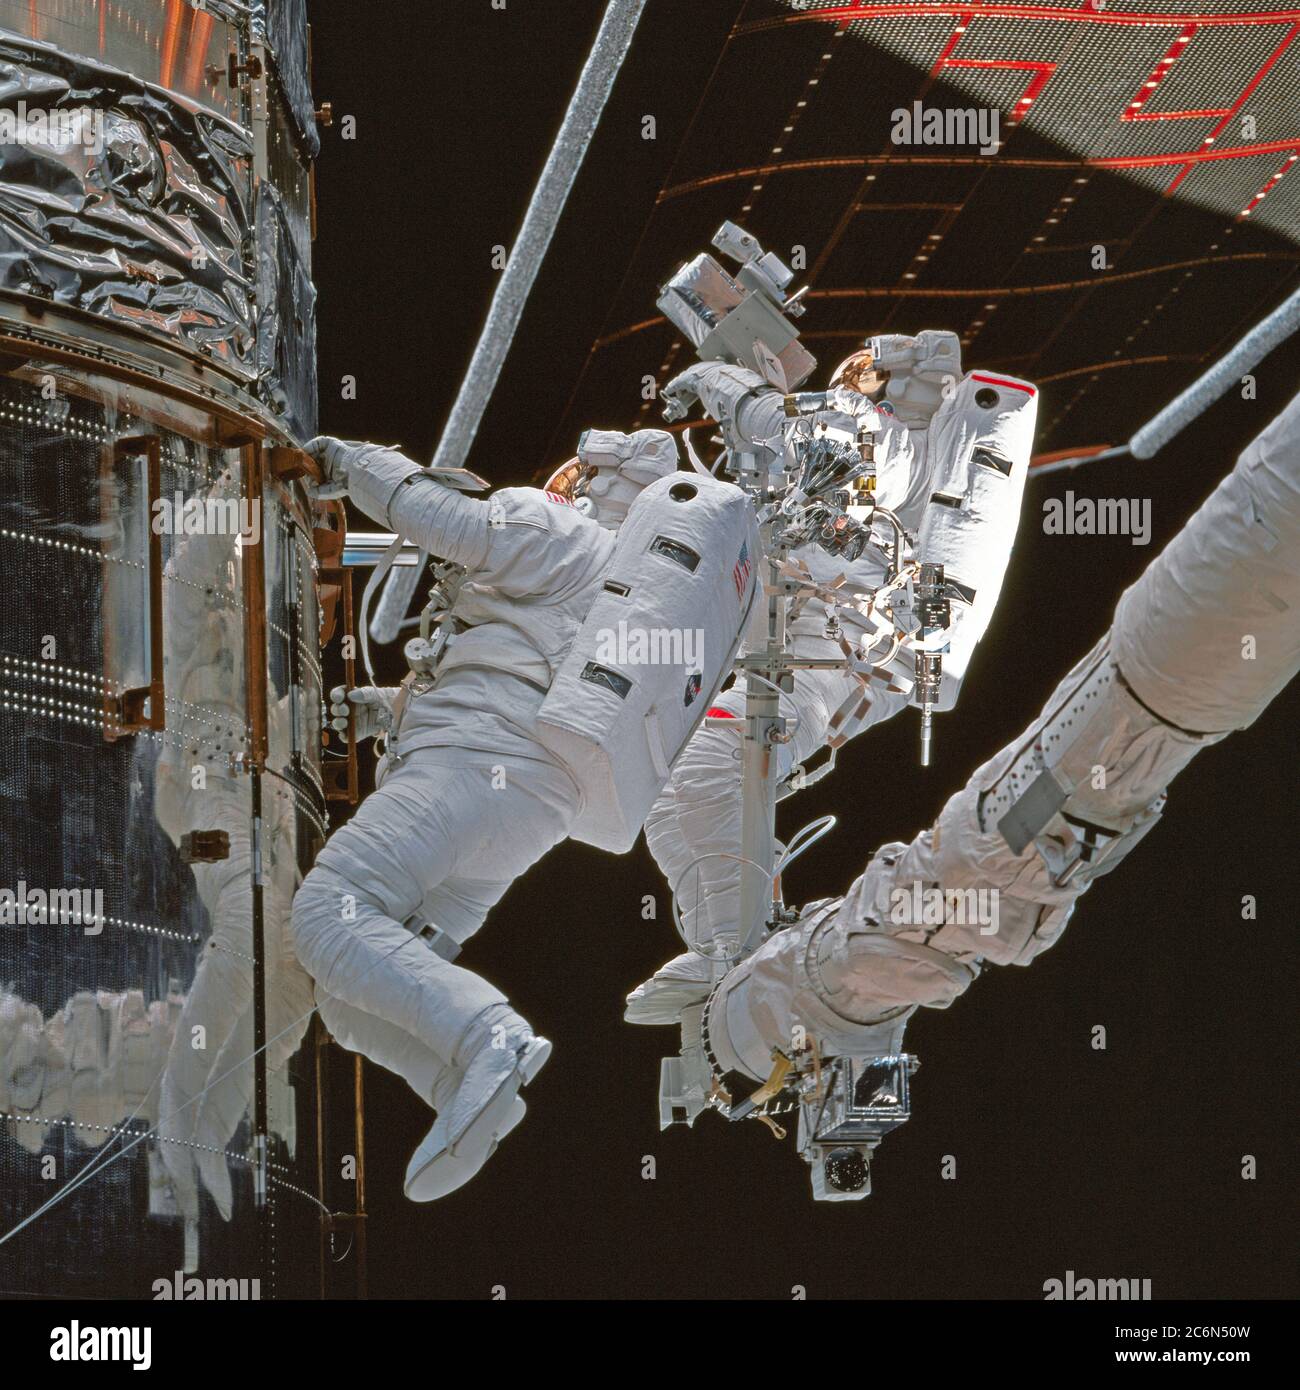 (11-21 Feb. 1997) --- As photographed from inside the Space Shuttle Discovery's crew cabin, astronauts Steven L. Smith (left) and Mark C. Lee (red stripe) inspect insulation around Bay 10 of the Hubble Space Telescope (HST) during one of five days of extravehicular activities (EVA) designed to service the HST.  Lee, payload commander, and Smith, performed three of the five EVA's which eventually were carried out on the mission. Stock Photo